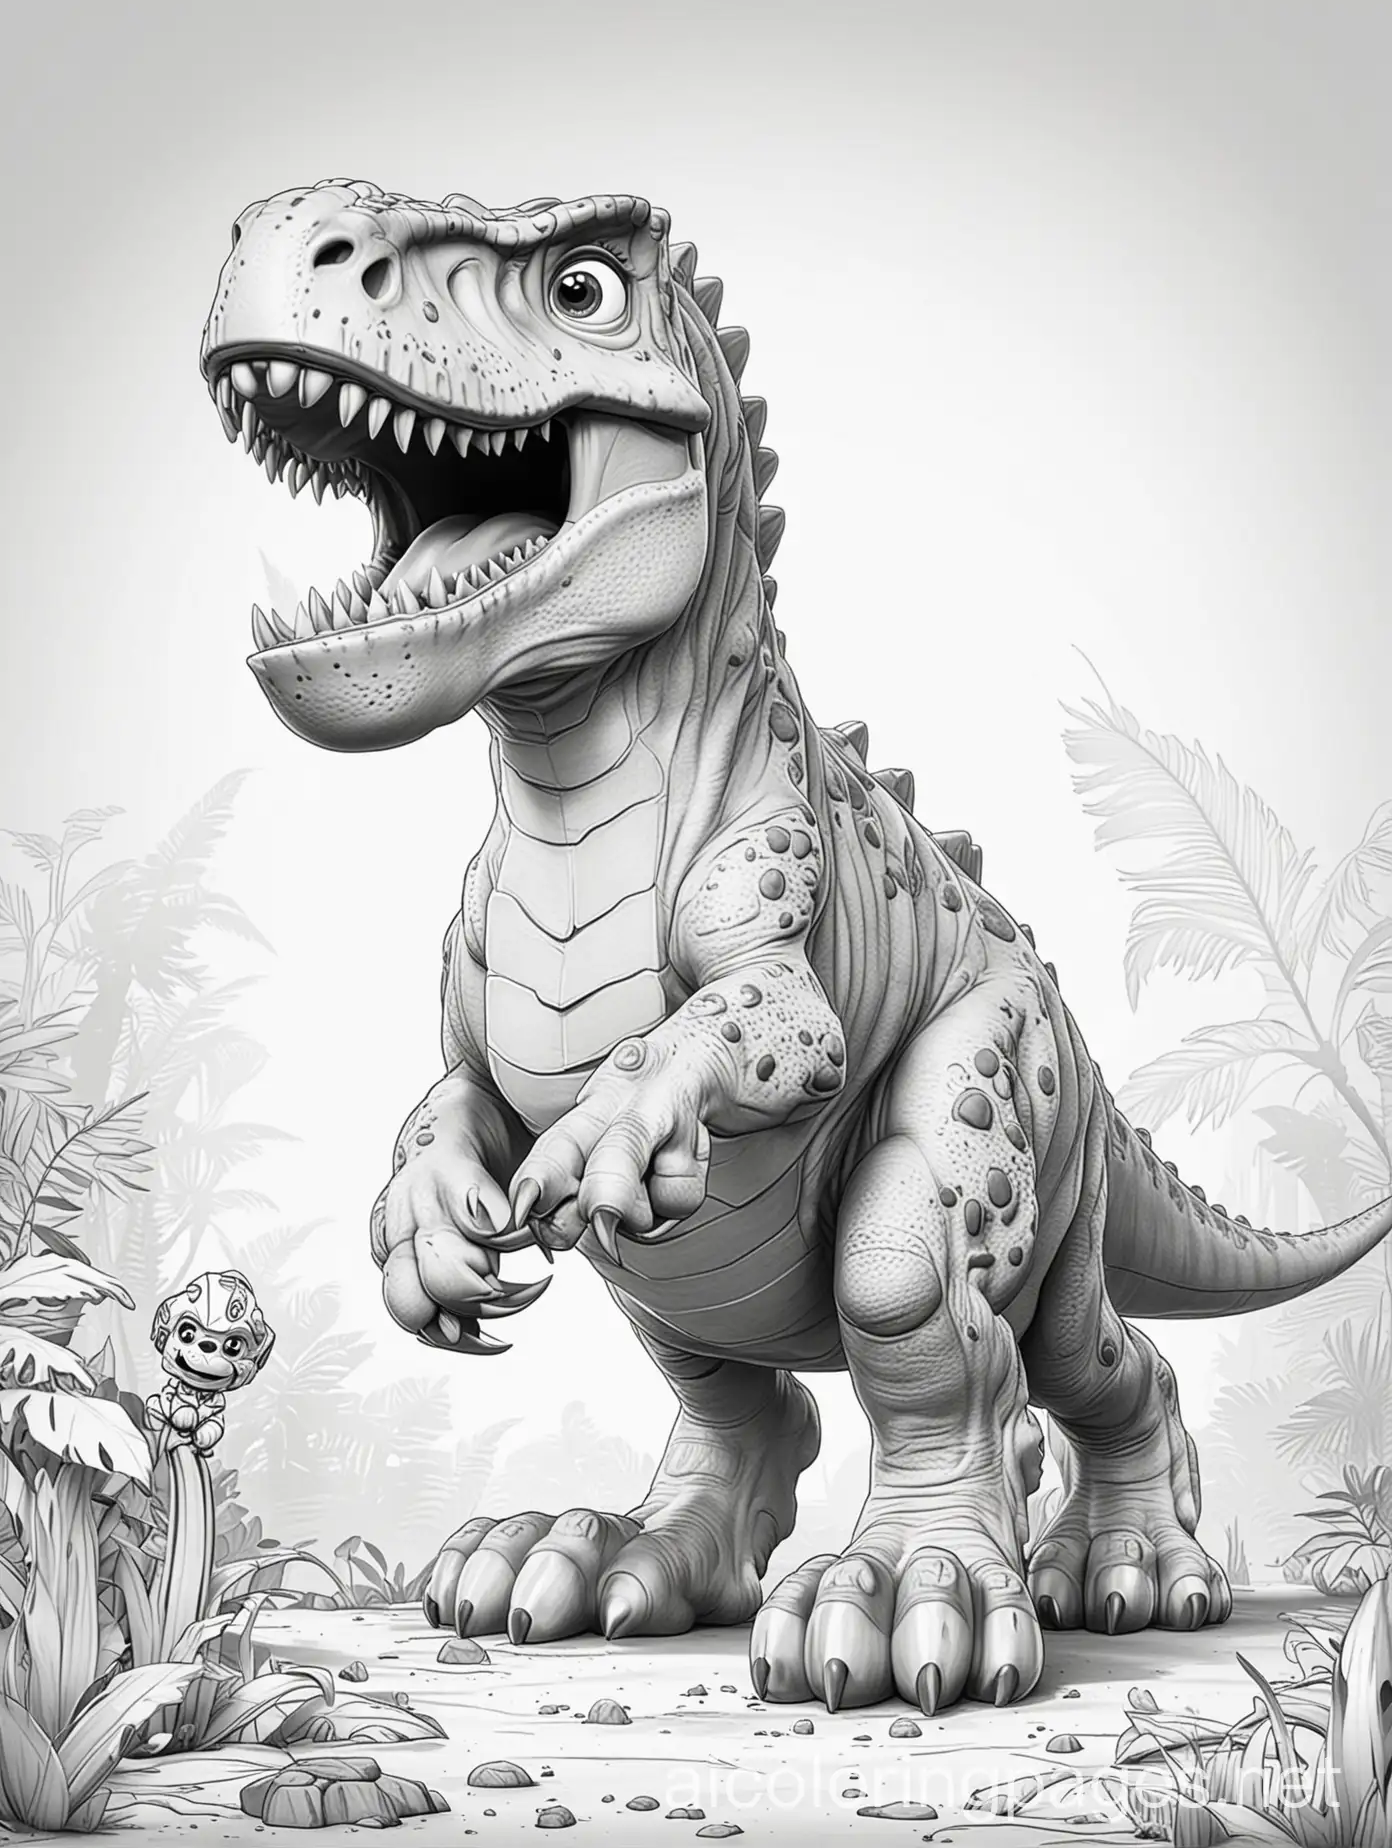 paw patrol and Tyrannosaurus rex, Coloring Page, black and white, line art, white background, Simplicity, Ample White Space. The background of the coloring page is plain white to make it easy for young children to color within the lines. The outlines of all the subjects are easy to distinguish, making it simple for kids to color without too much difficulty